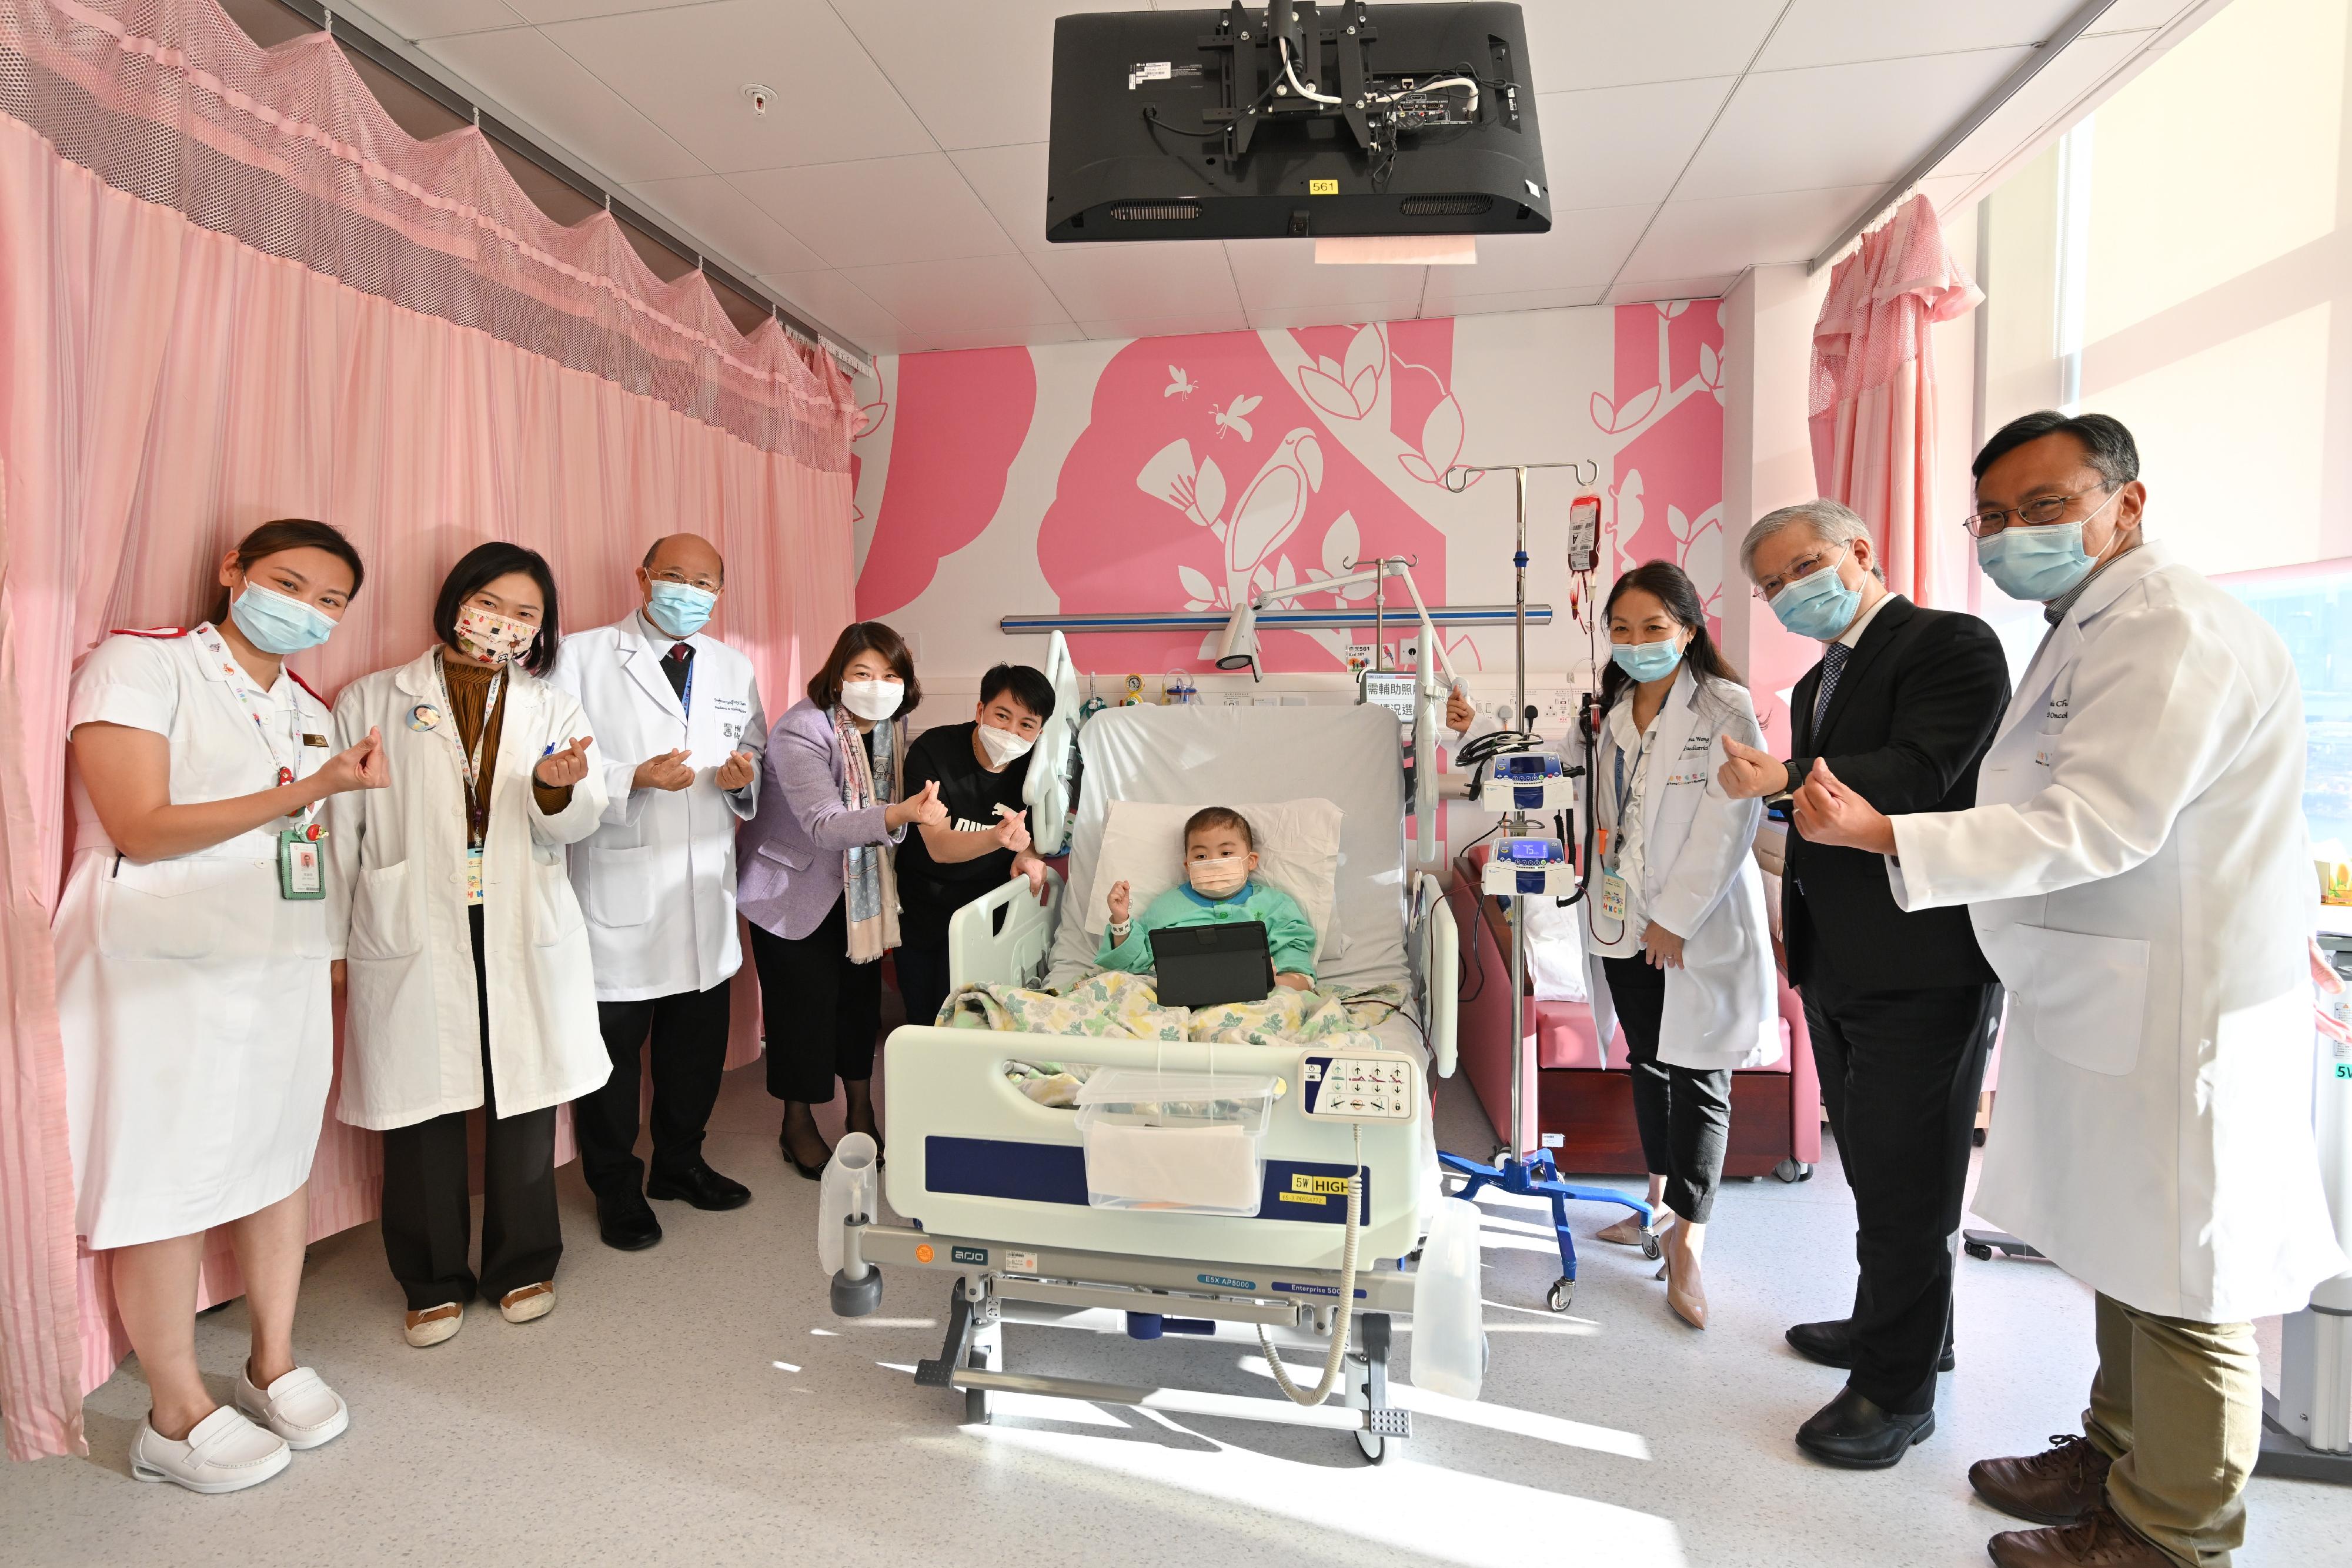 The Under Secretary for Health, Dr Libby Lee, visited Hong Kong Children's Hospital (HKCH) today (December 23). Photo shows Dr Libby Lee (fourth left), and the Hospital Chief Executive of HKCH, Dr Lee Tsz-leung (second right), visiting a hospitalised boy, Zhi-yuan.